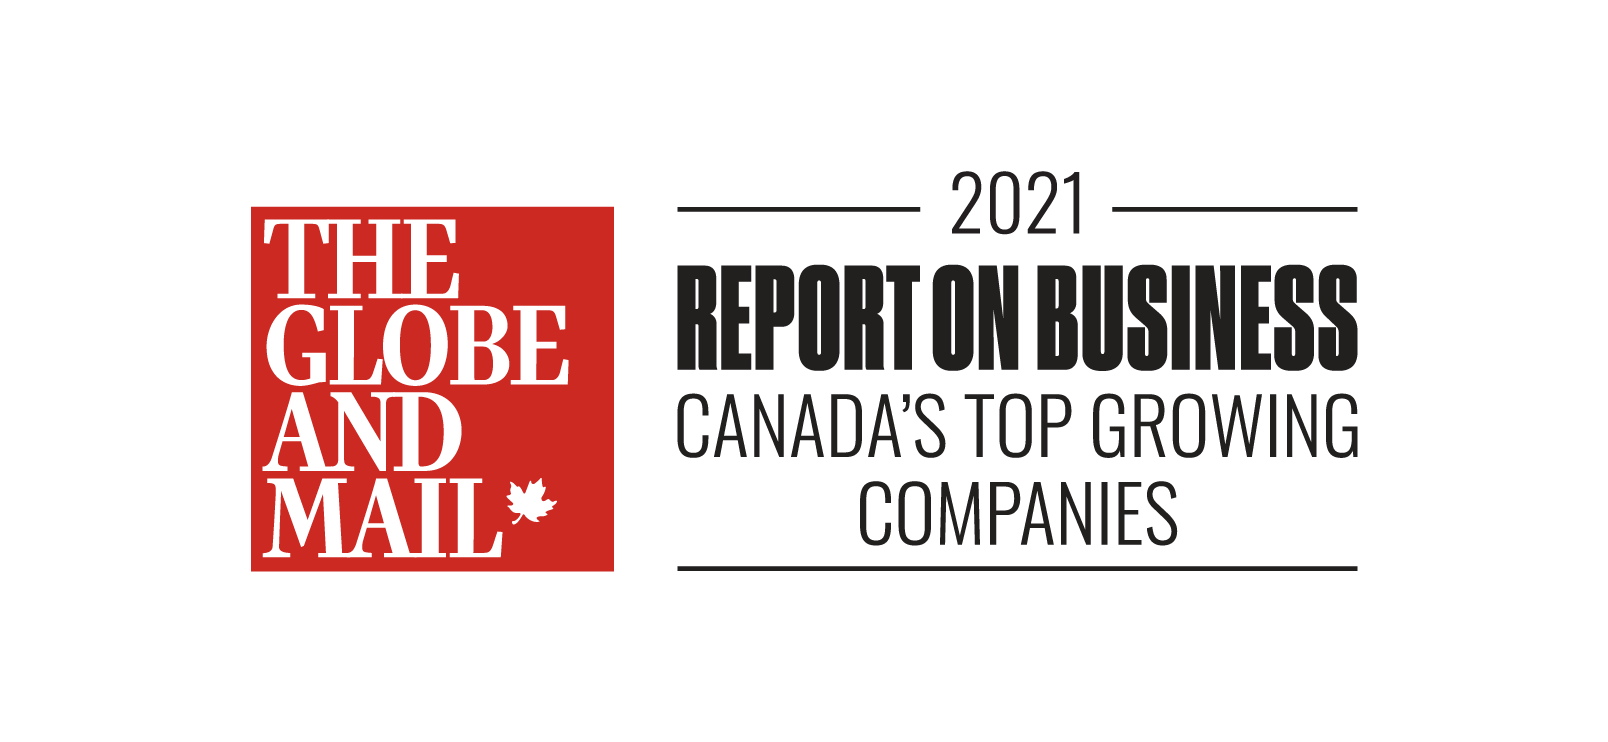 The Globe and Mail - 2021 Report on business (Canada's top growing companies)